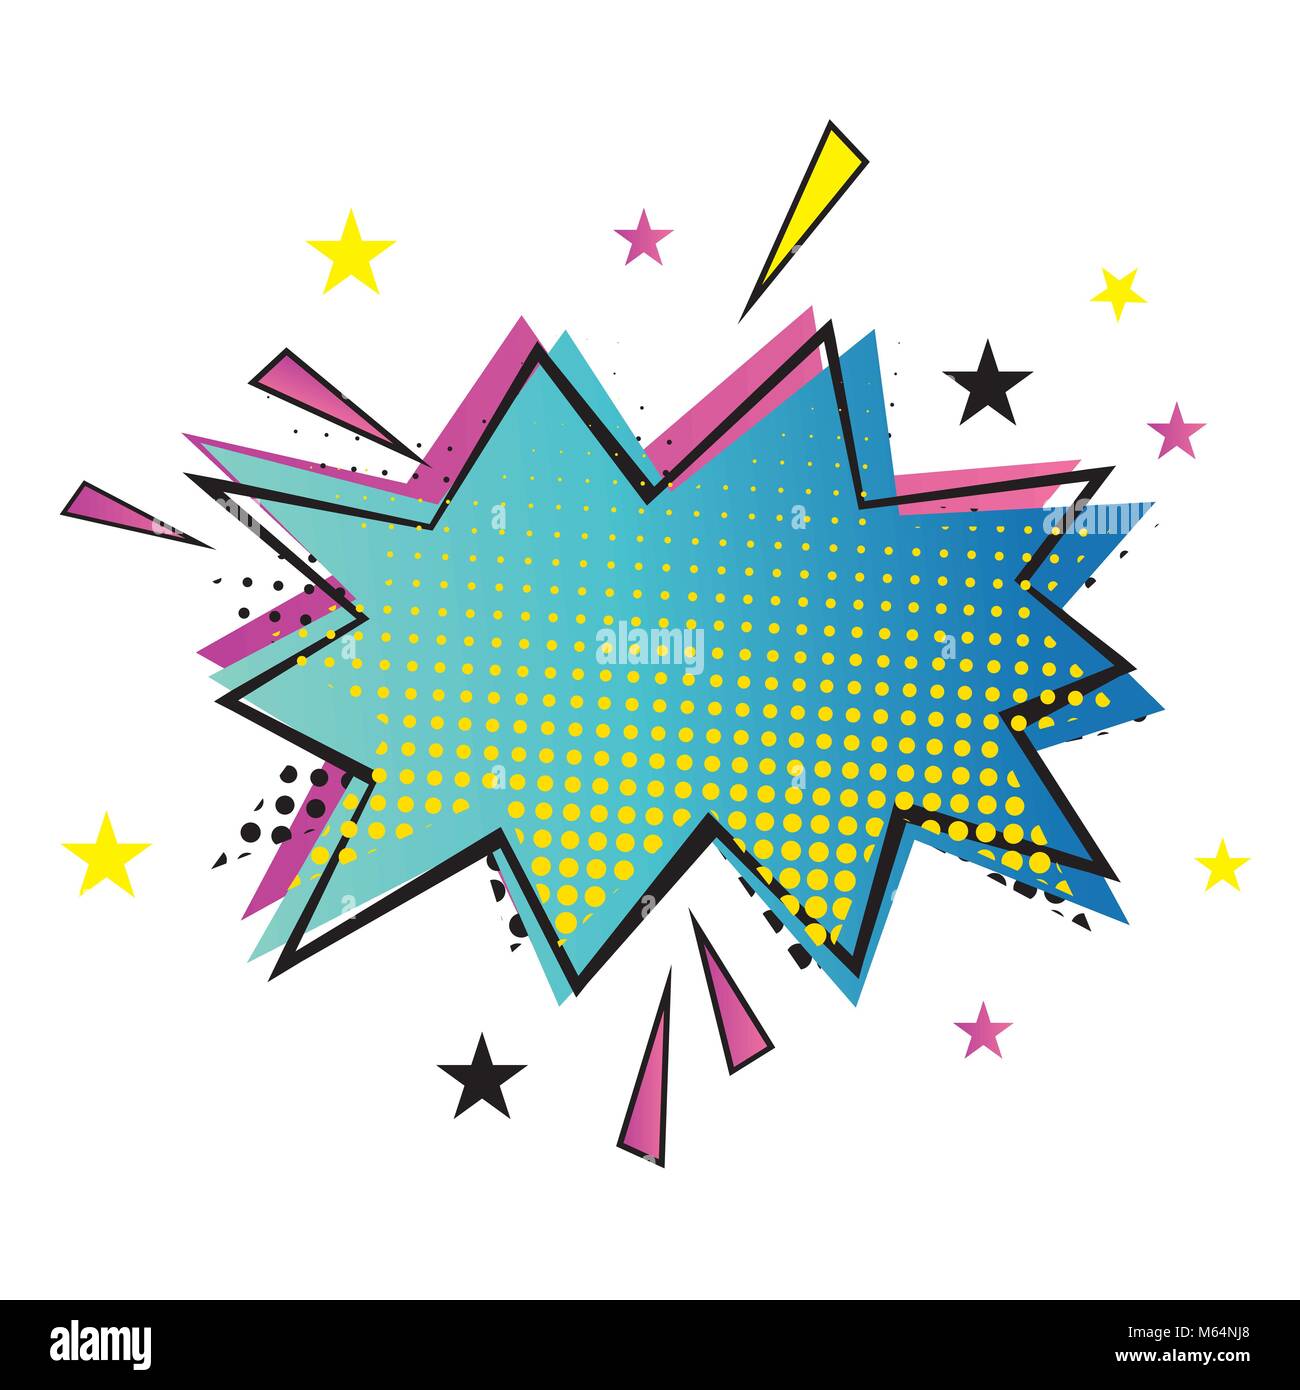 Dialogue Bubble in Pop Art Comics Style with Halftone Texture. Vector Illustration. Stock Vector